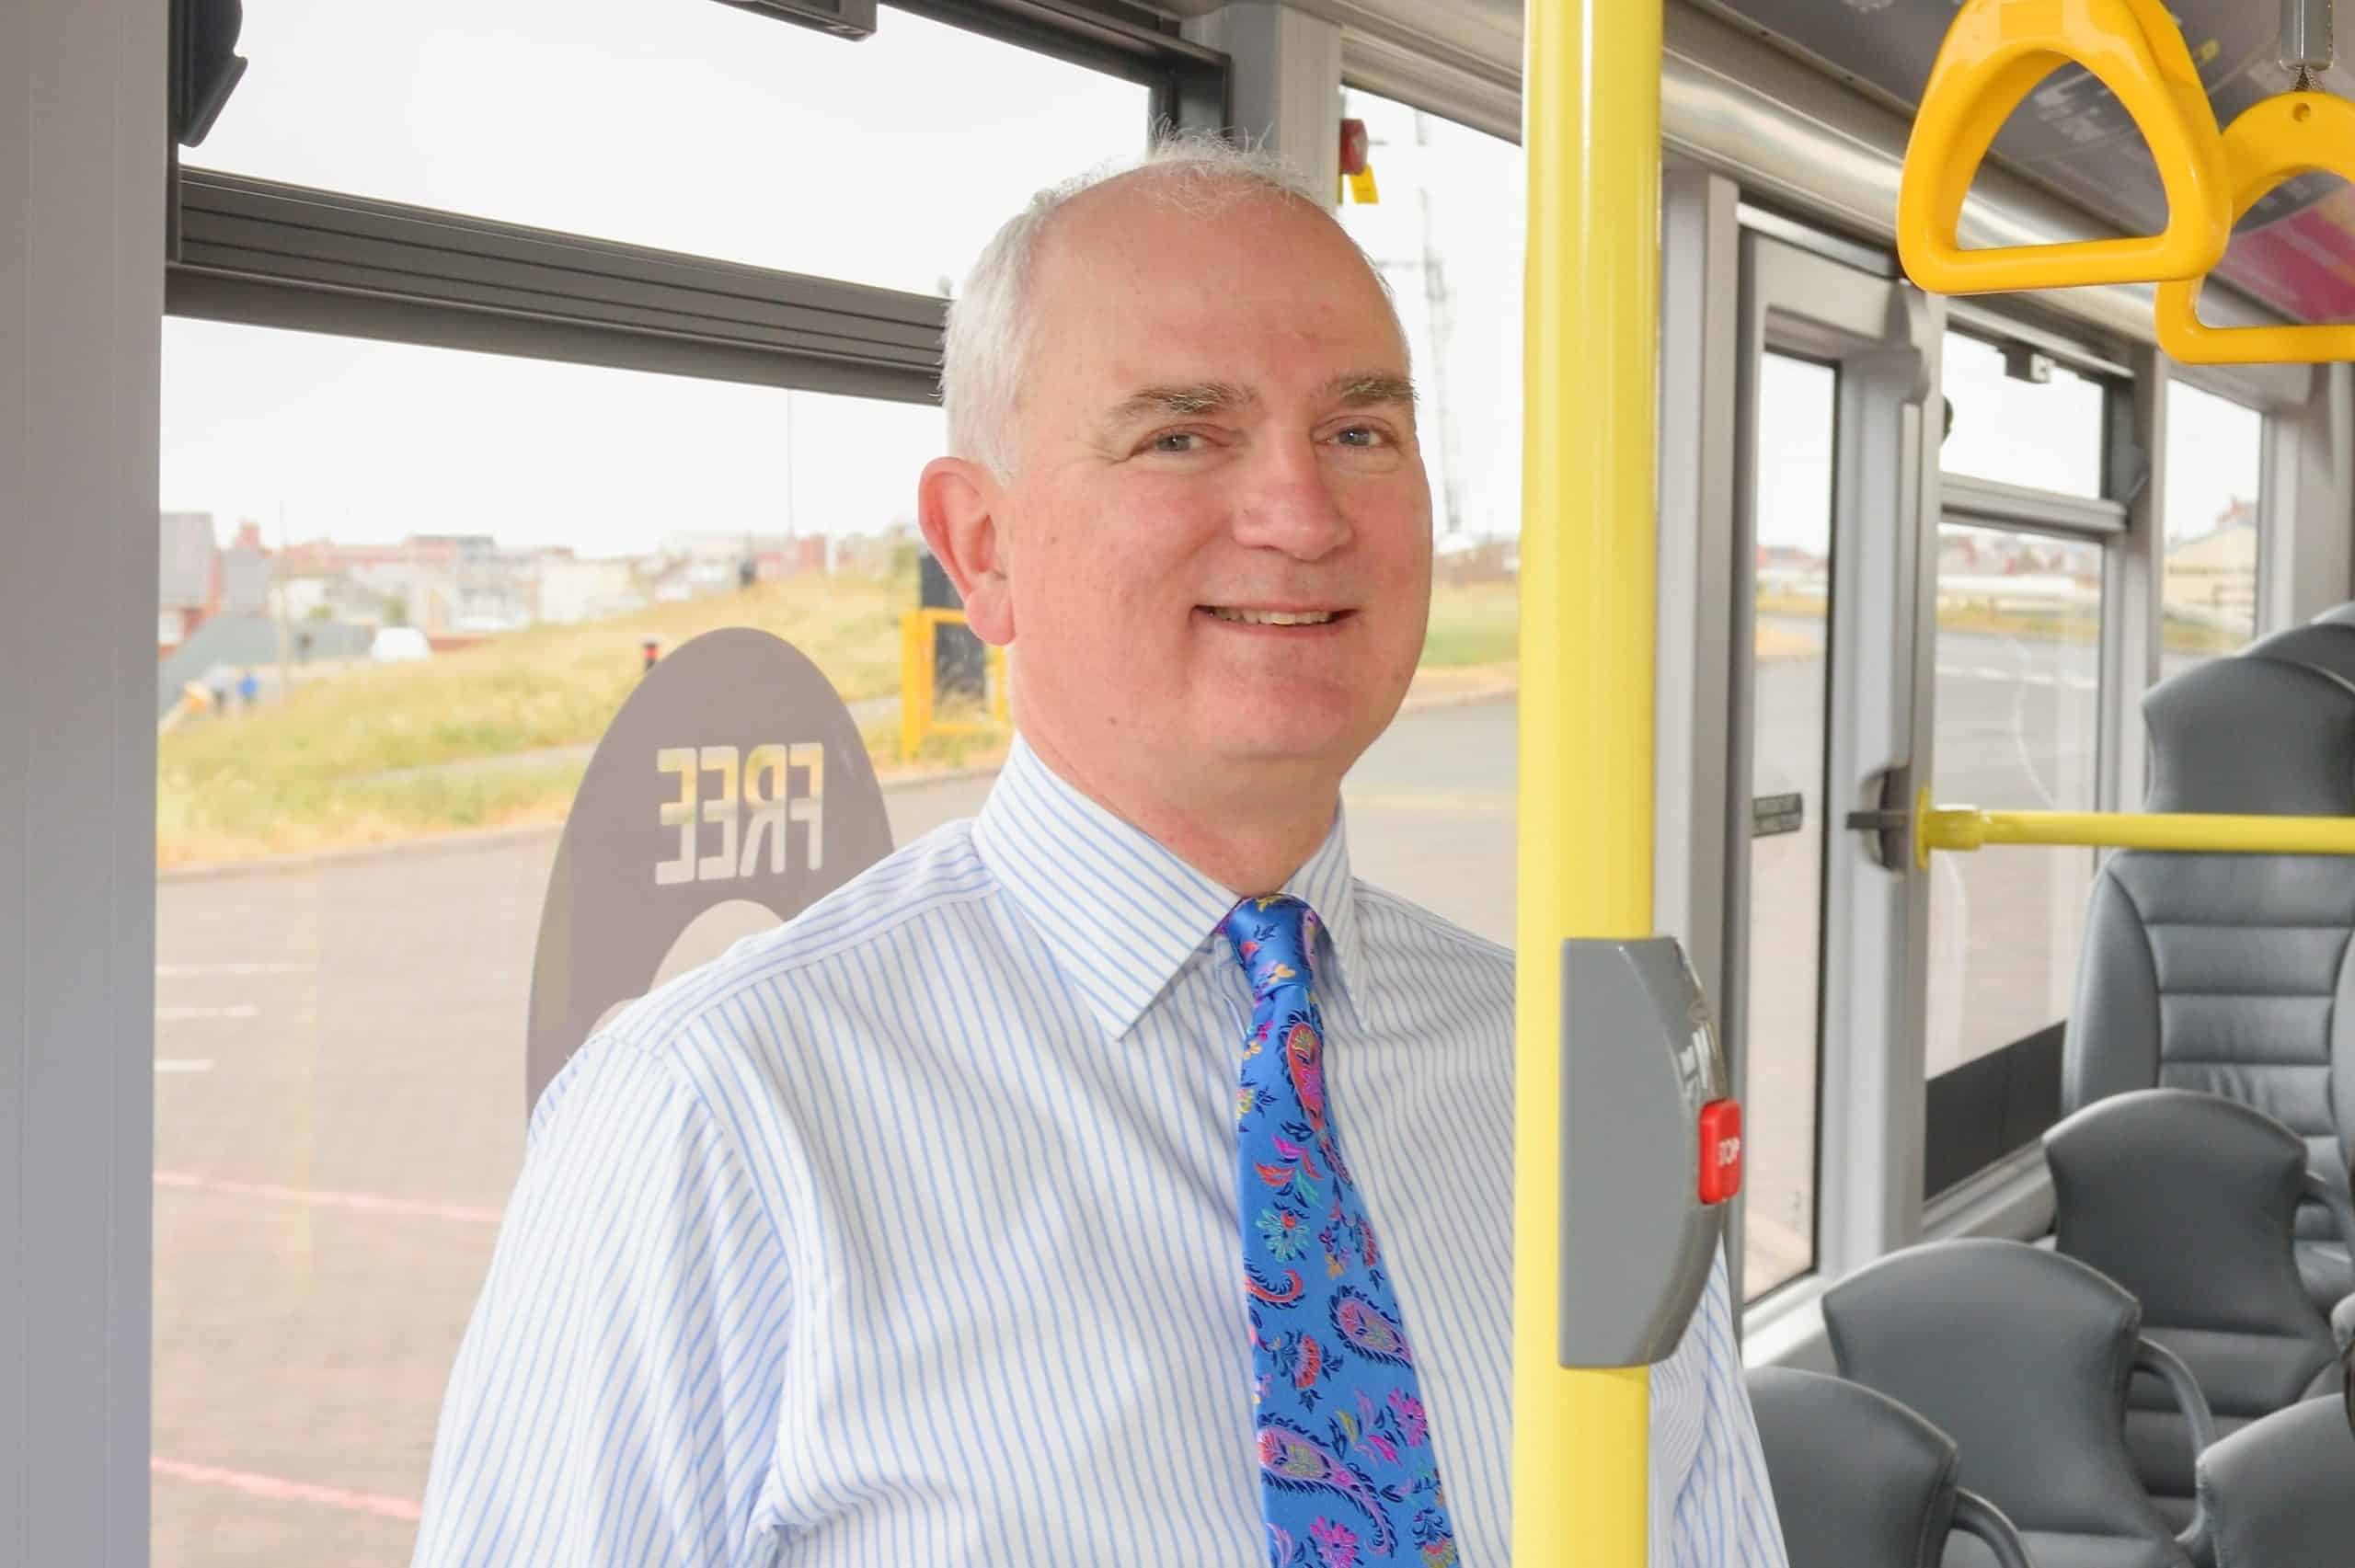 Blackpool Transport Finance and Commercial Director James Carney